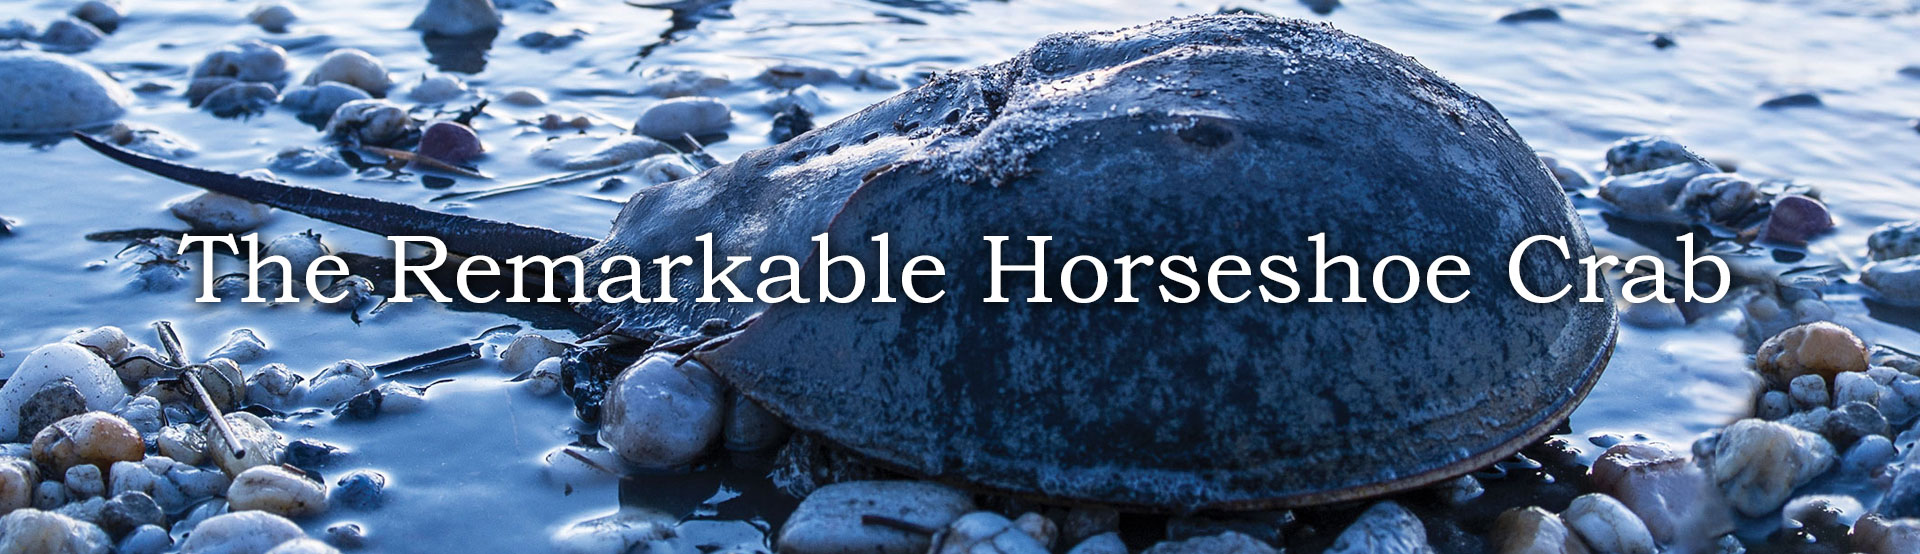 The Remarkable Horseshoe Crab